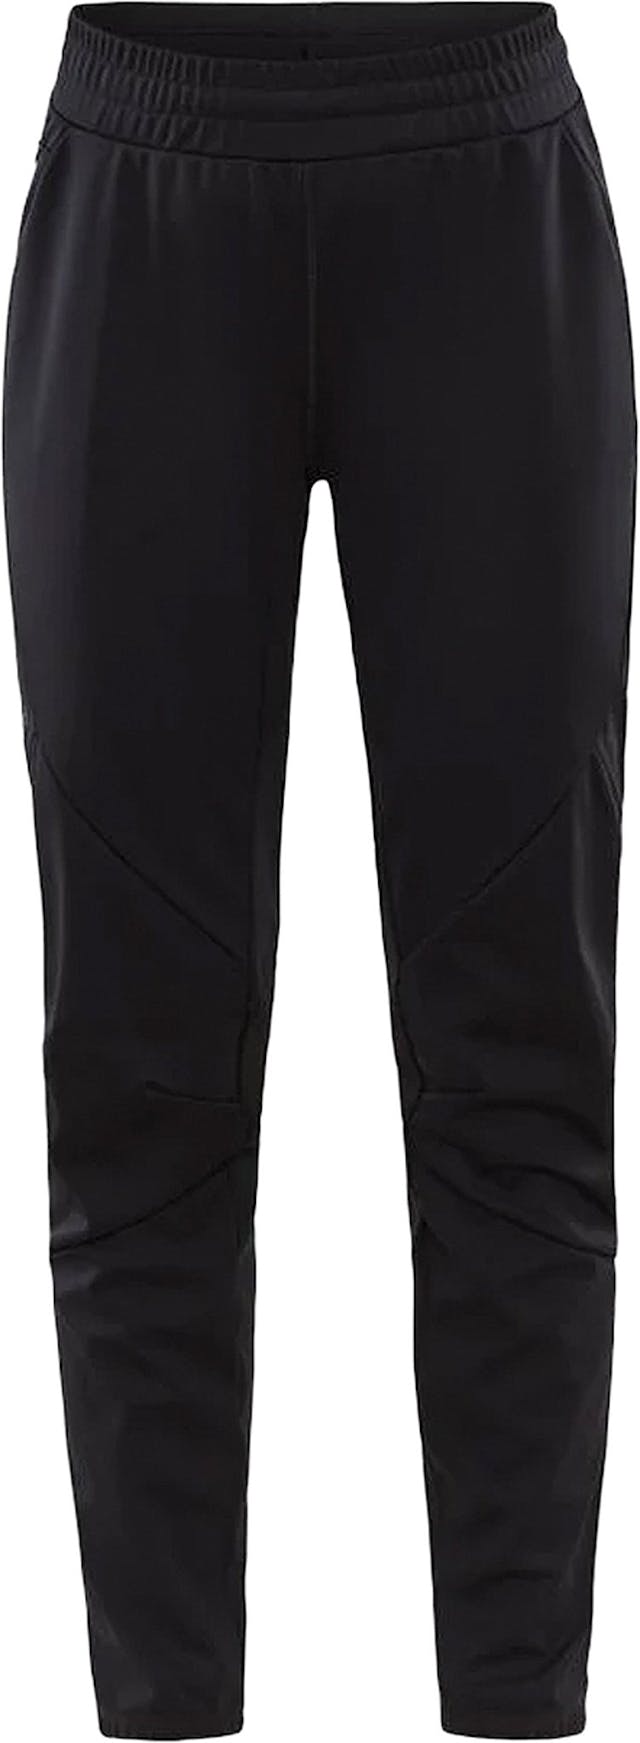 Product image for Core Nordic Training Pants - Women's